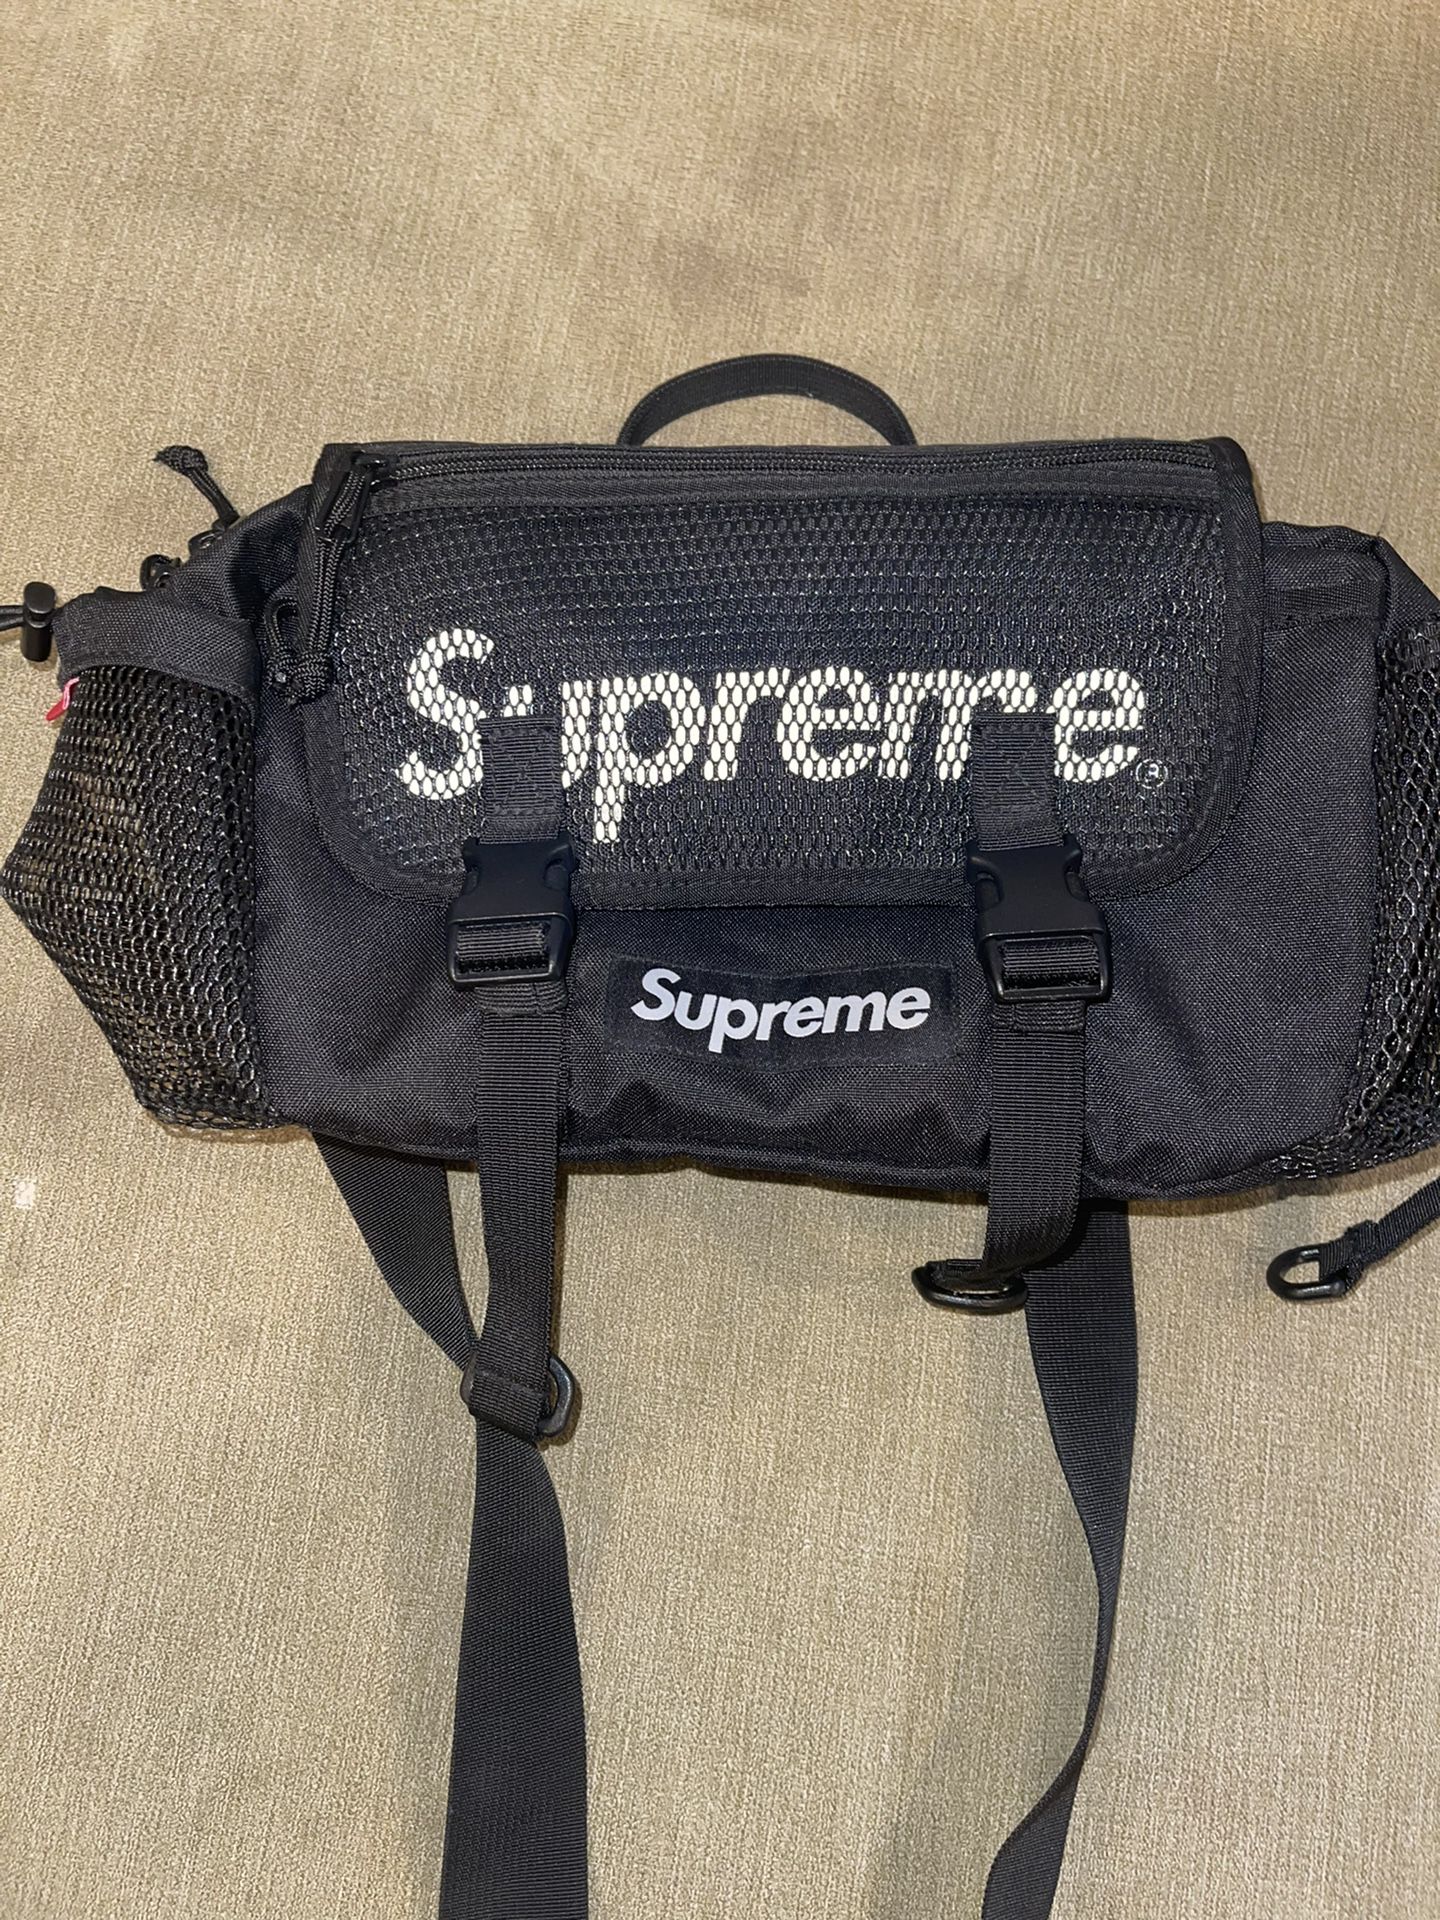 Supreme Backpack SS20 Red for Sale in Bloomfield Township, MI - OfferUp